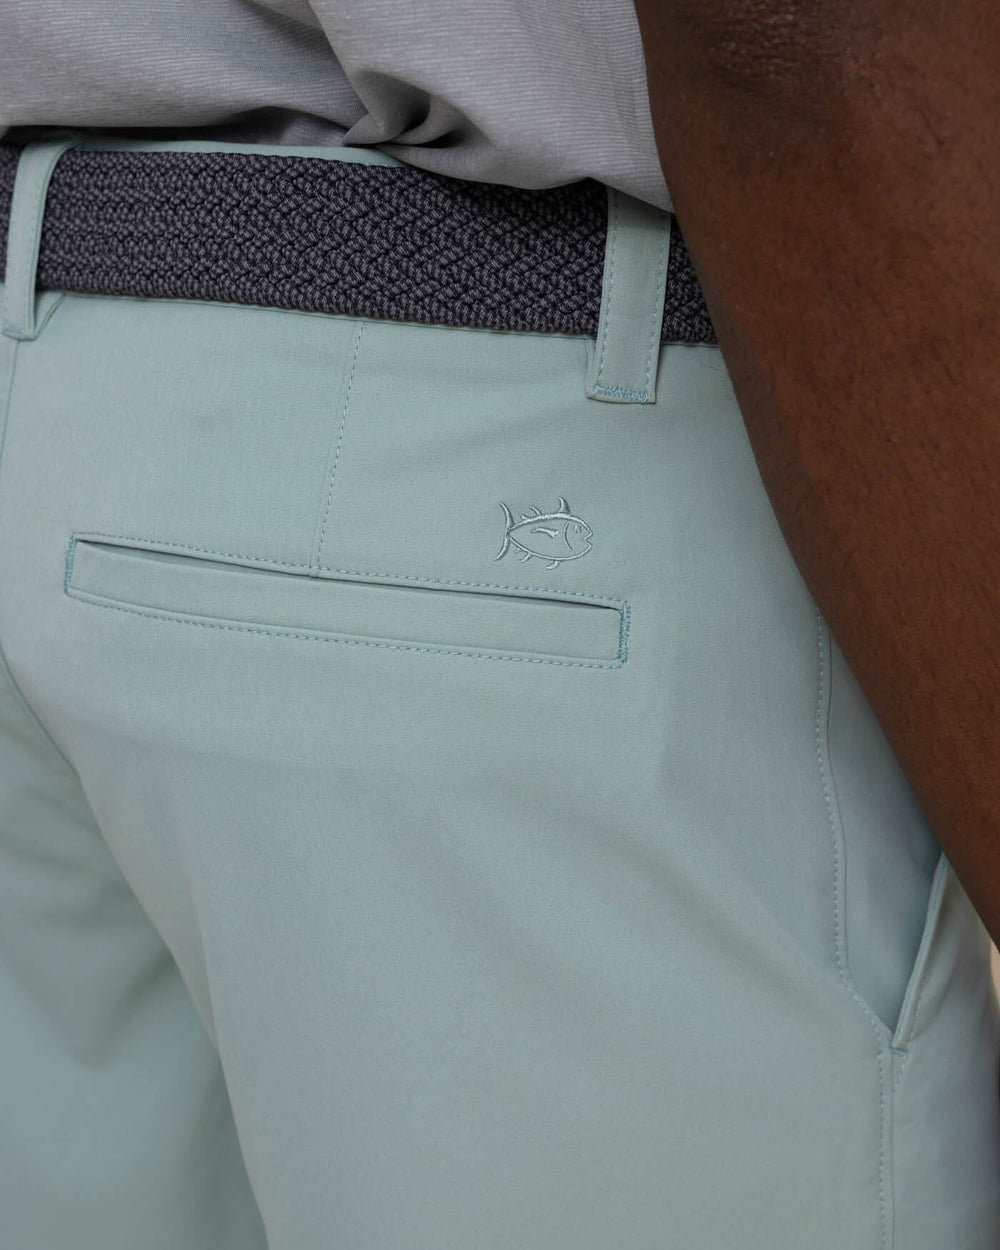 The detail view of the Southern Tide gulf 8 inch brrr die performance short by Southern Tide - Green Surf